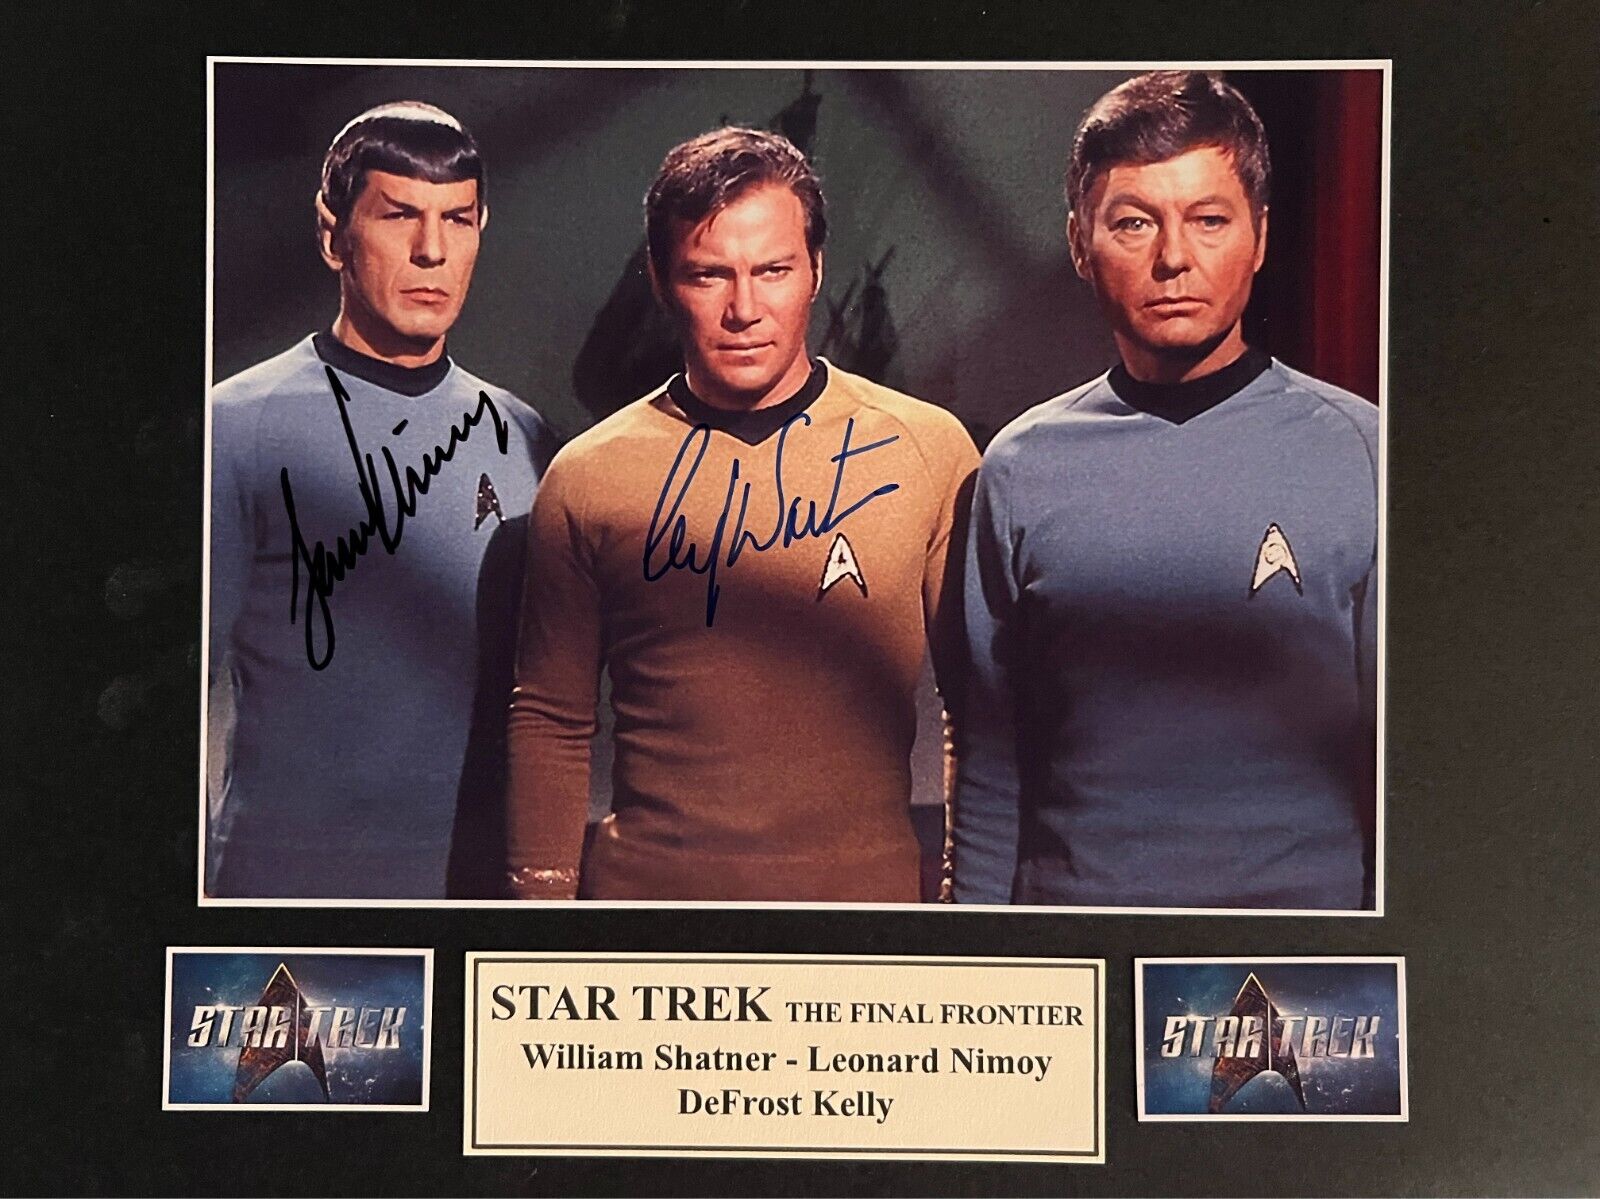 Star Trek cast signed photo autographed 8x10 inches